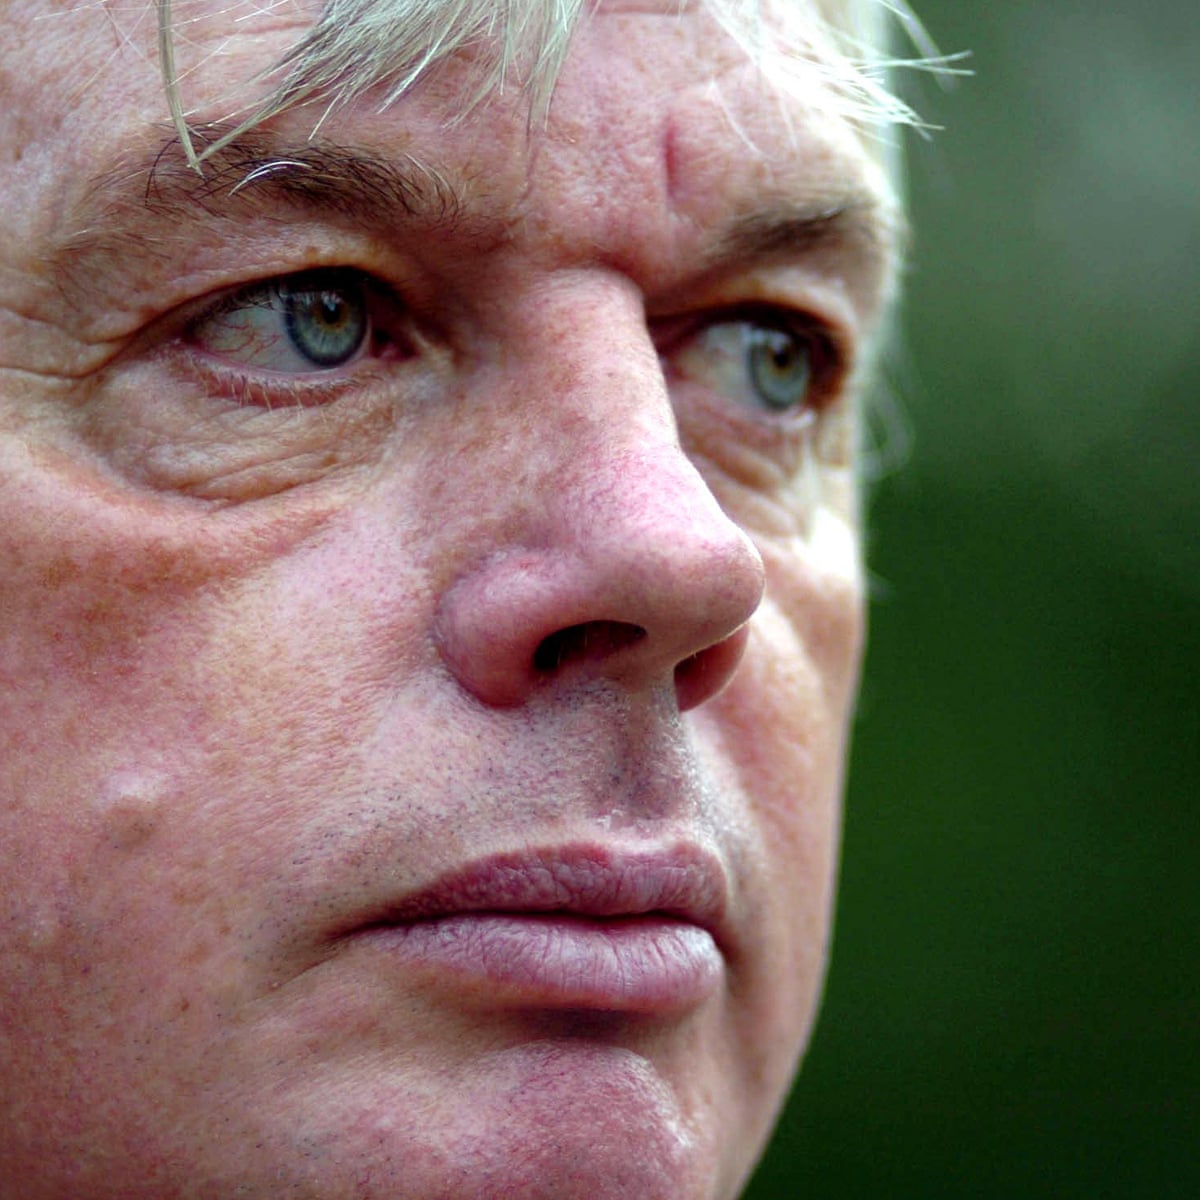 Conspiracy theorist David Icke should be banned from Australia ...